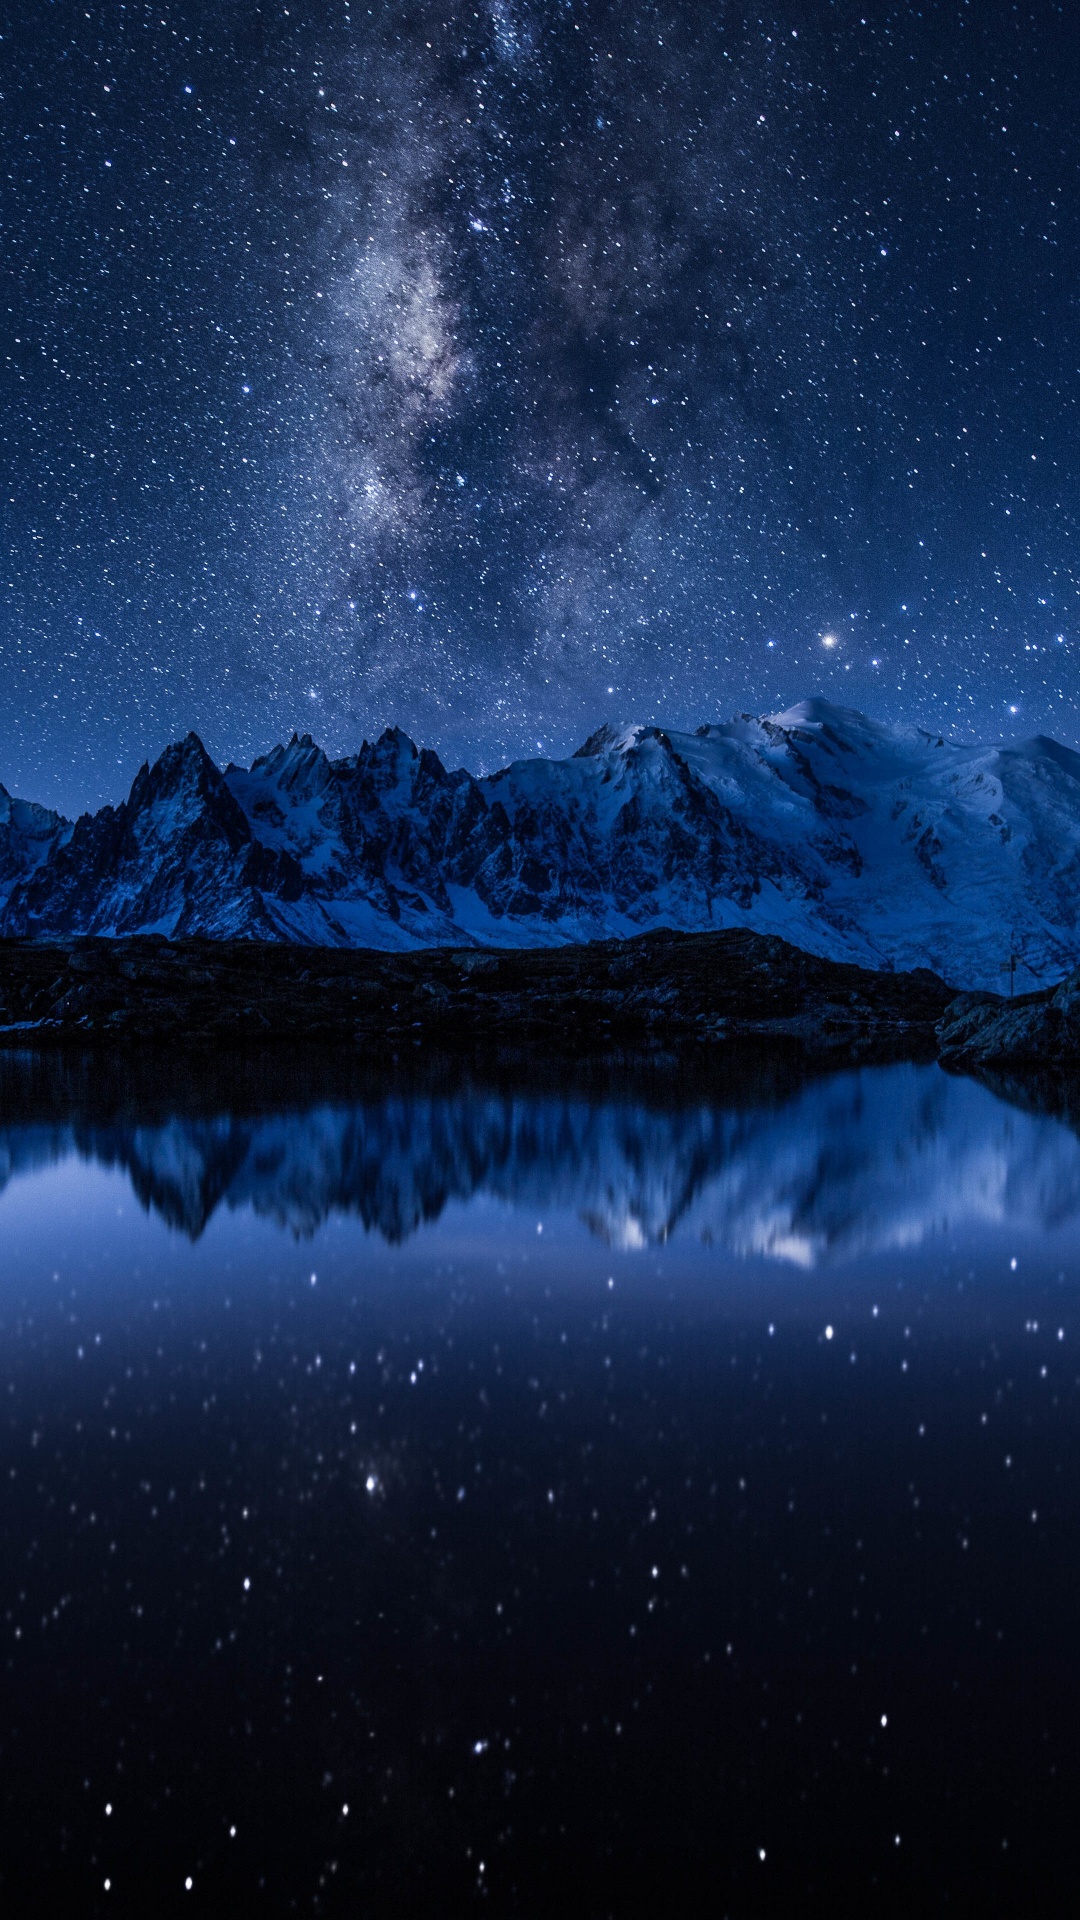 Snow Covered Mountain During Night Time. Wallpaper in 1080x1920 Resolution